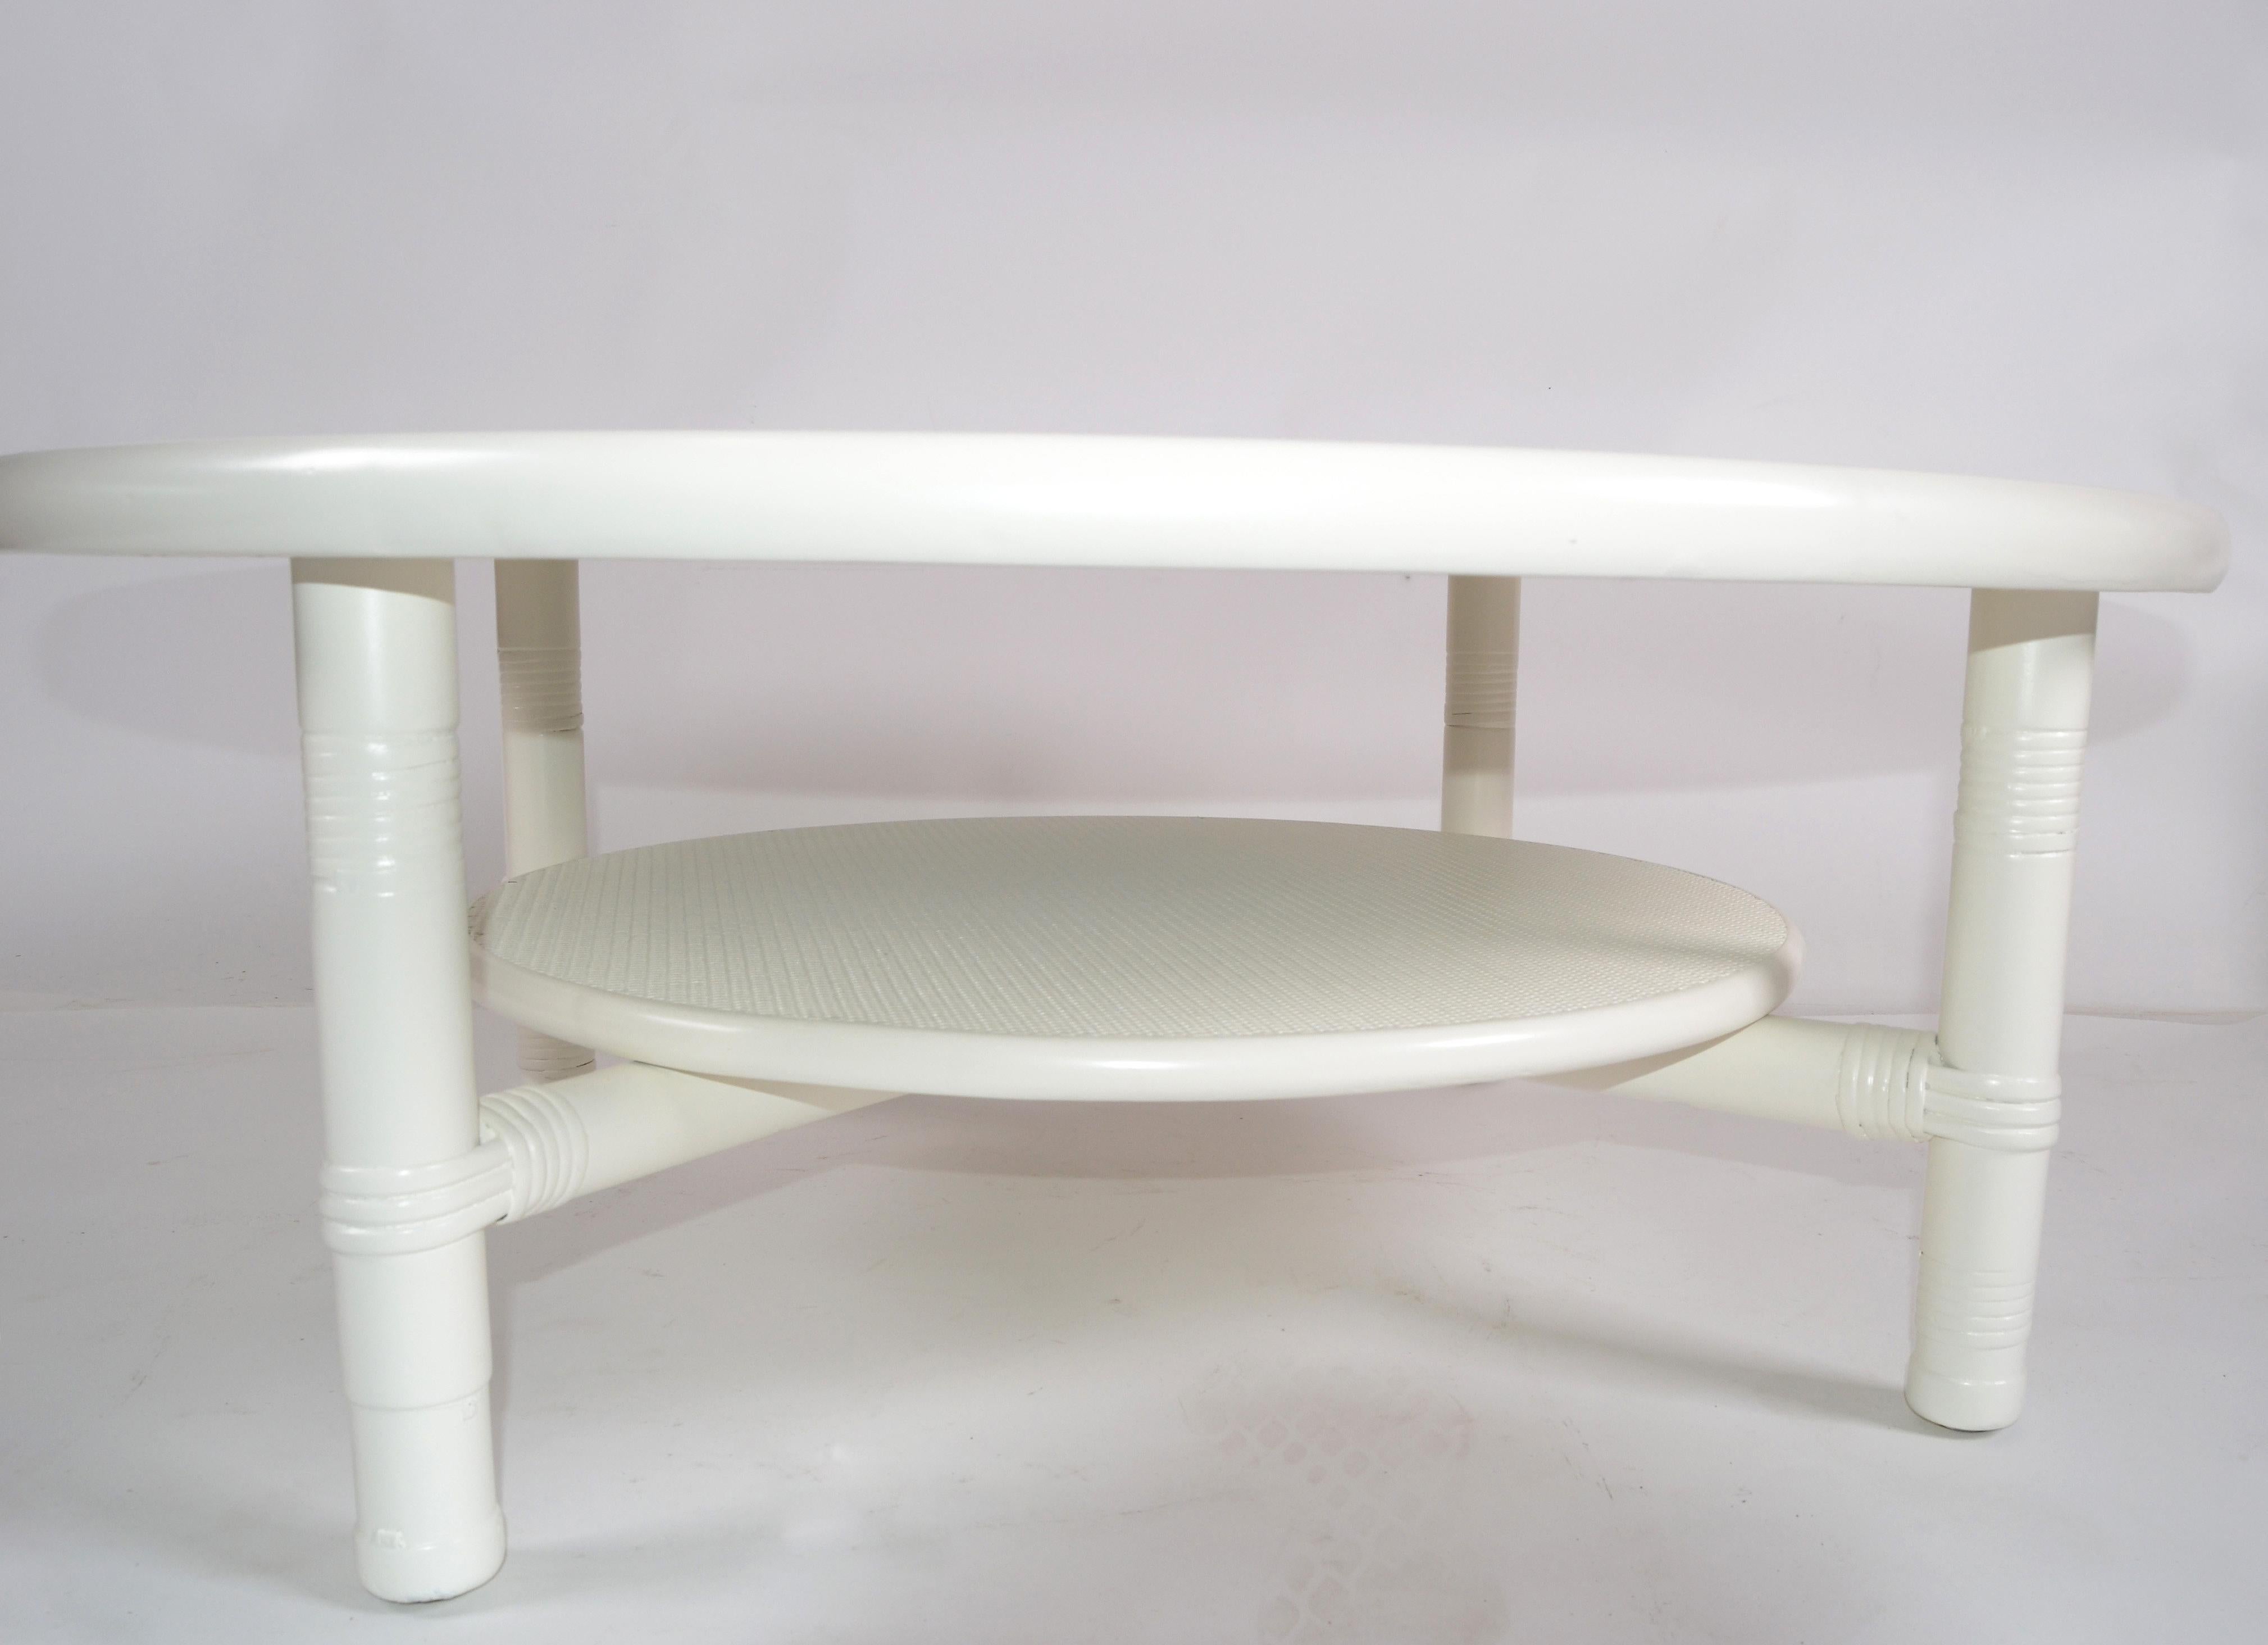 20th Century White Bamboo Rattan & Enamel 2-Tier Round Coffee Table Mid-Century Modern 1970s For Sale